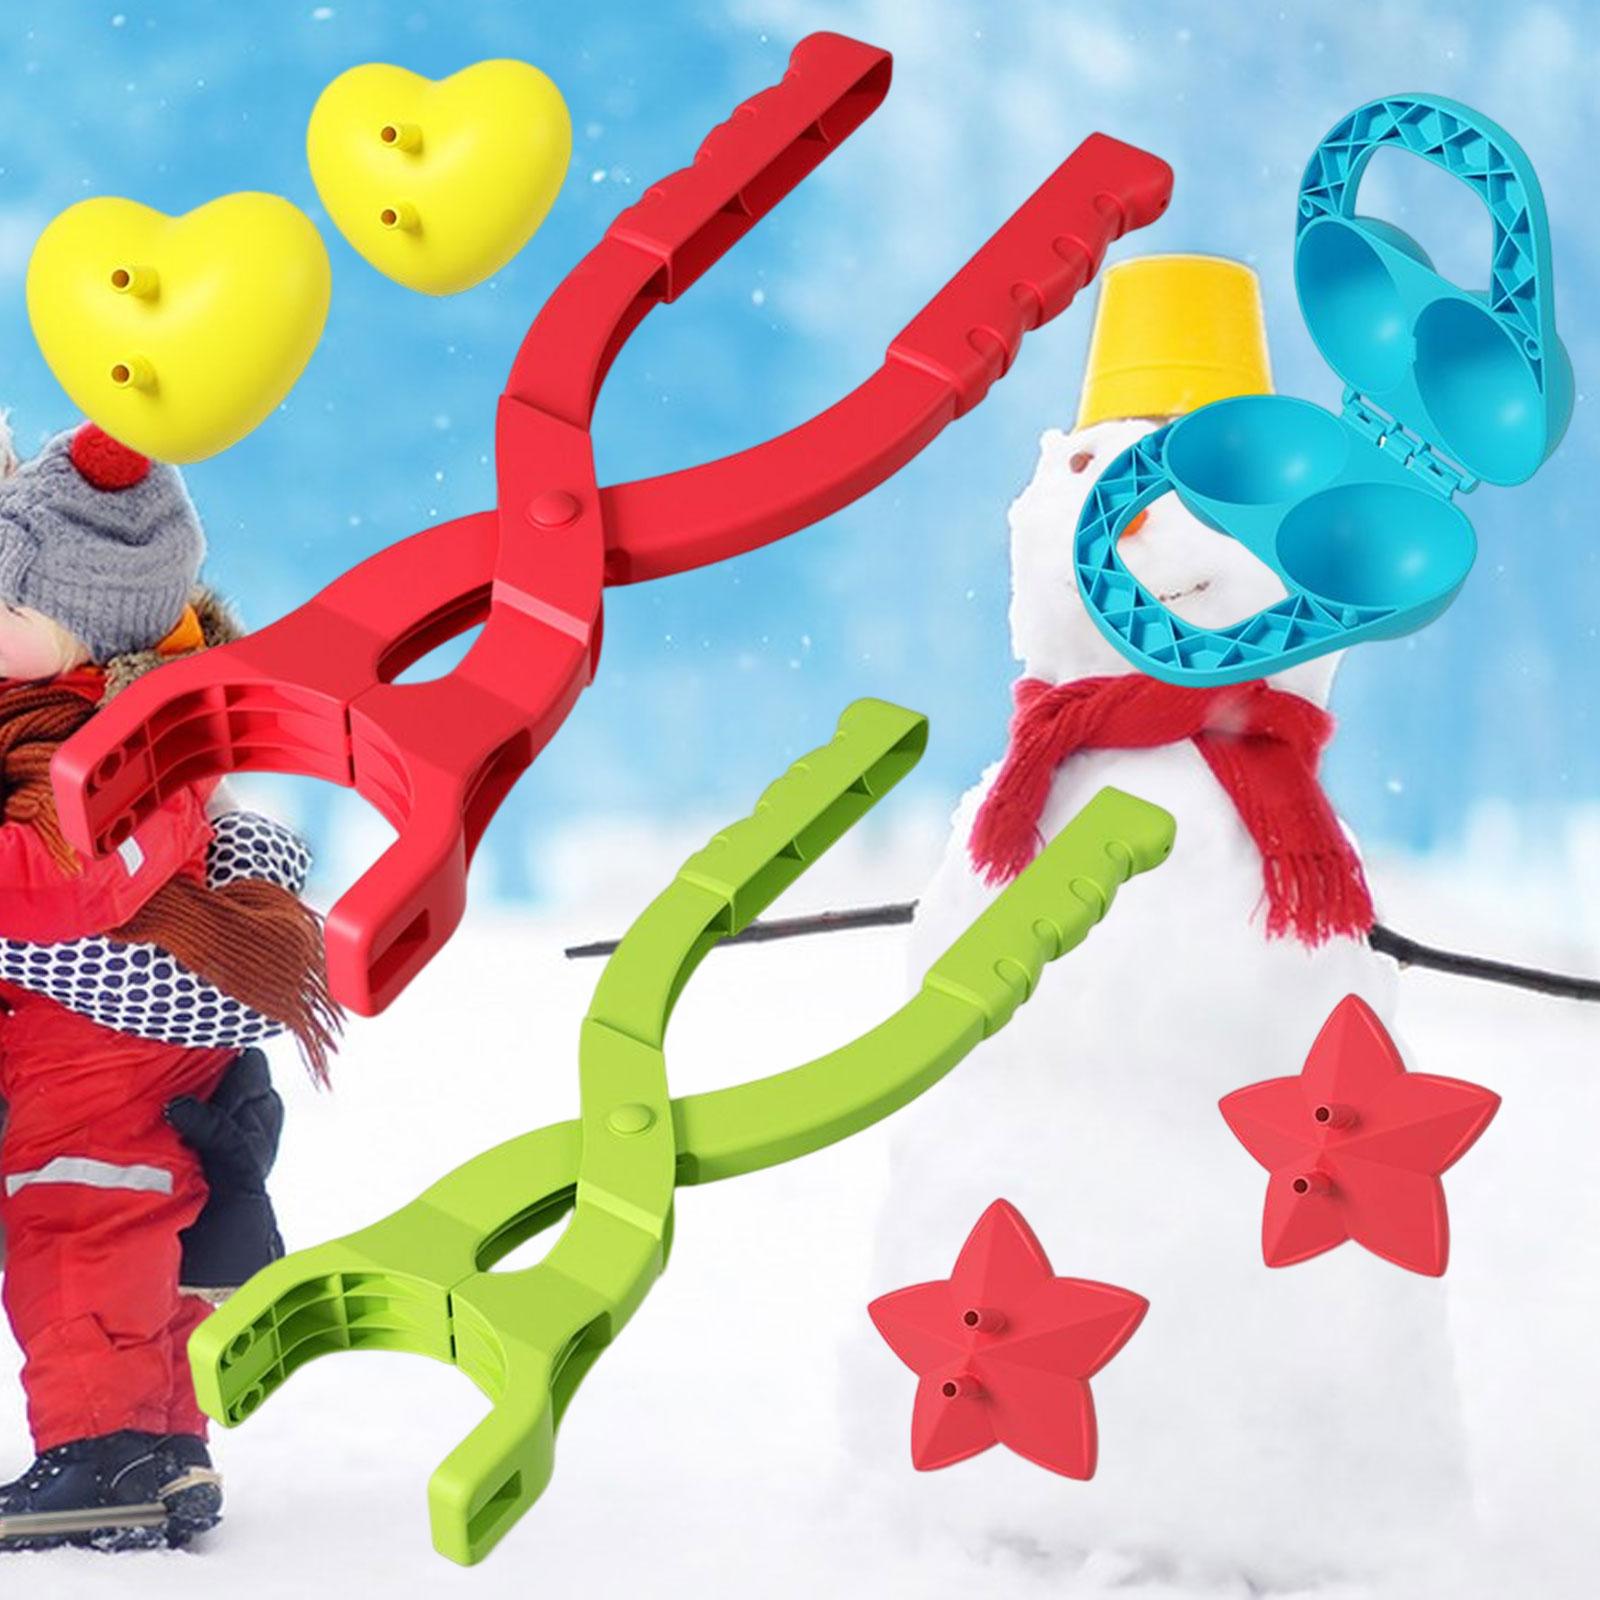 Snowball Maker Clip Winter Creative for Children Games Snow Ball Fights PentagramHeart2 in 1